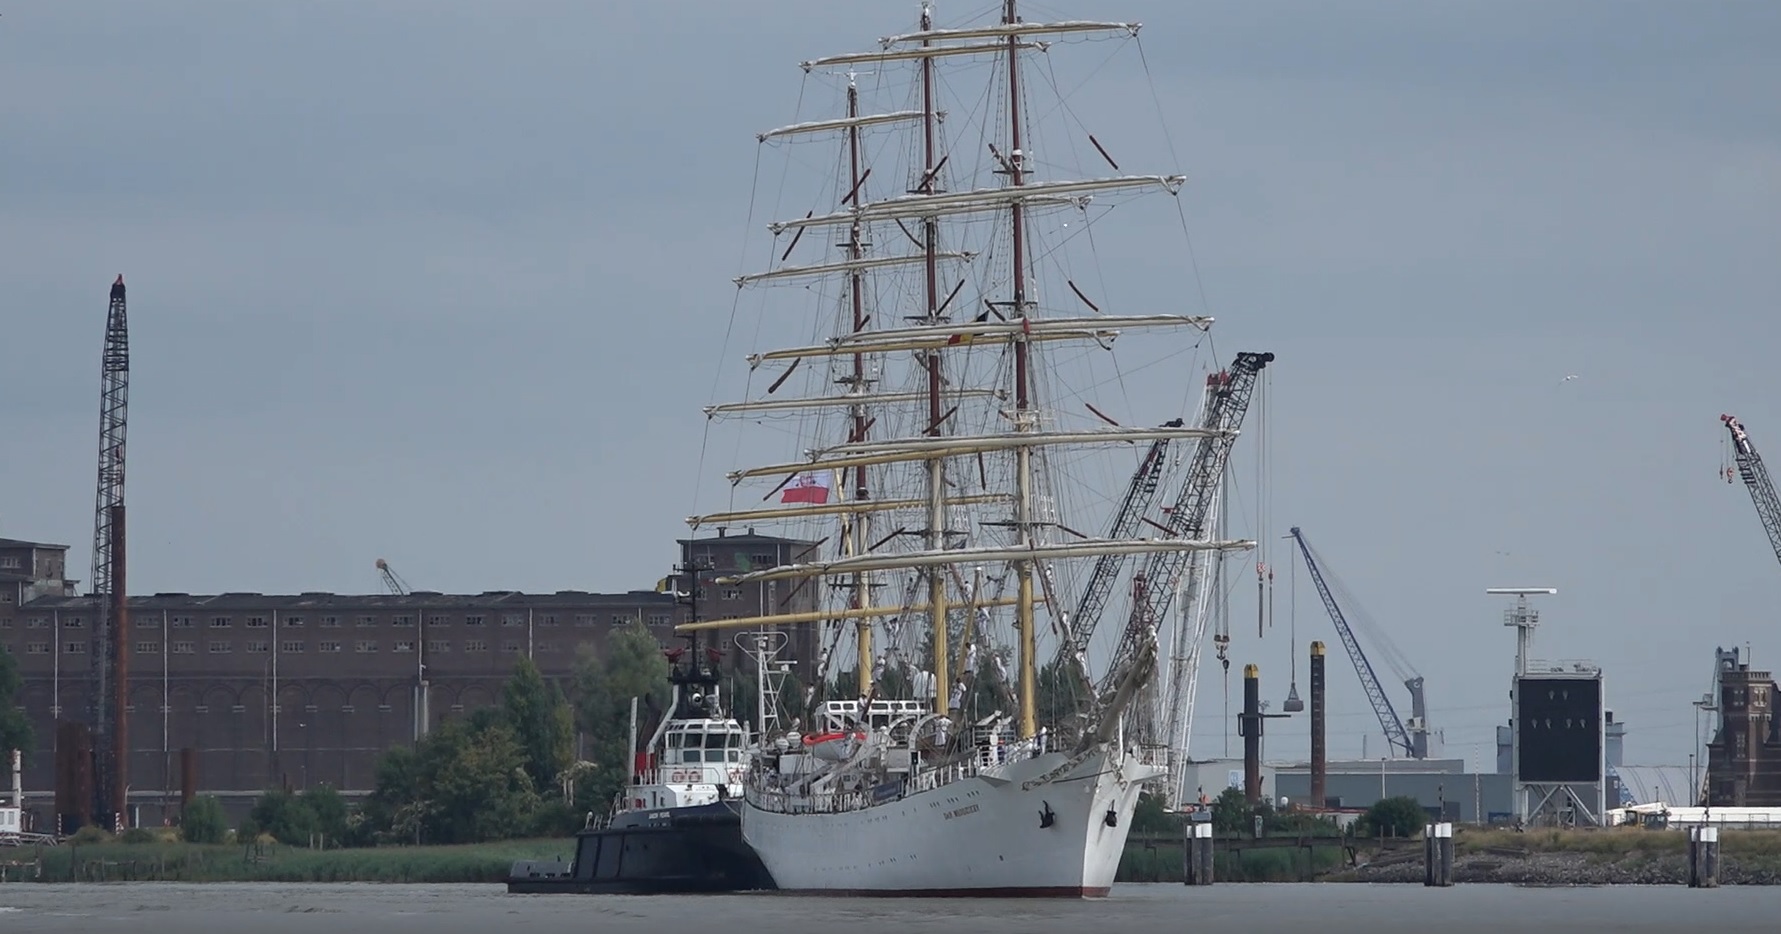 20220722 The Tall Ships Races, Antwerpen 2022